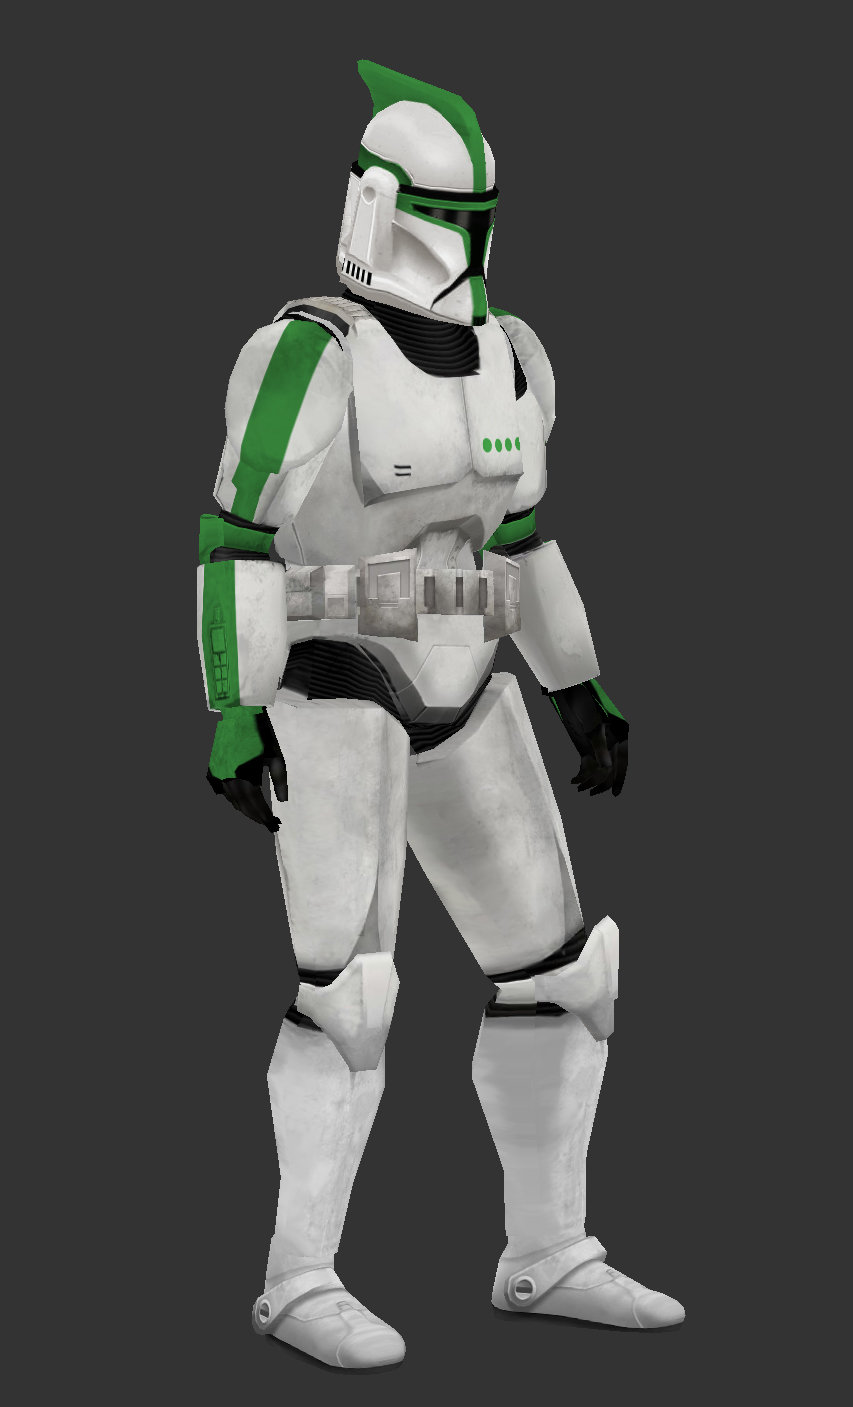 More information about "Clone Sergeant - Phase I"